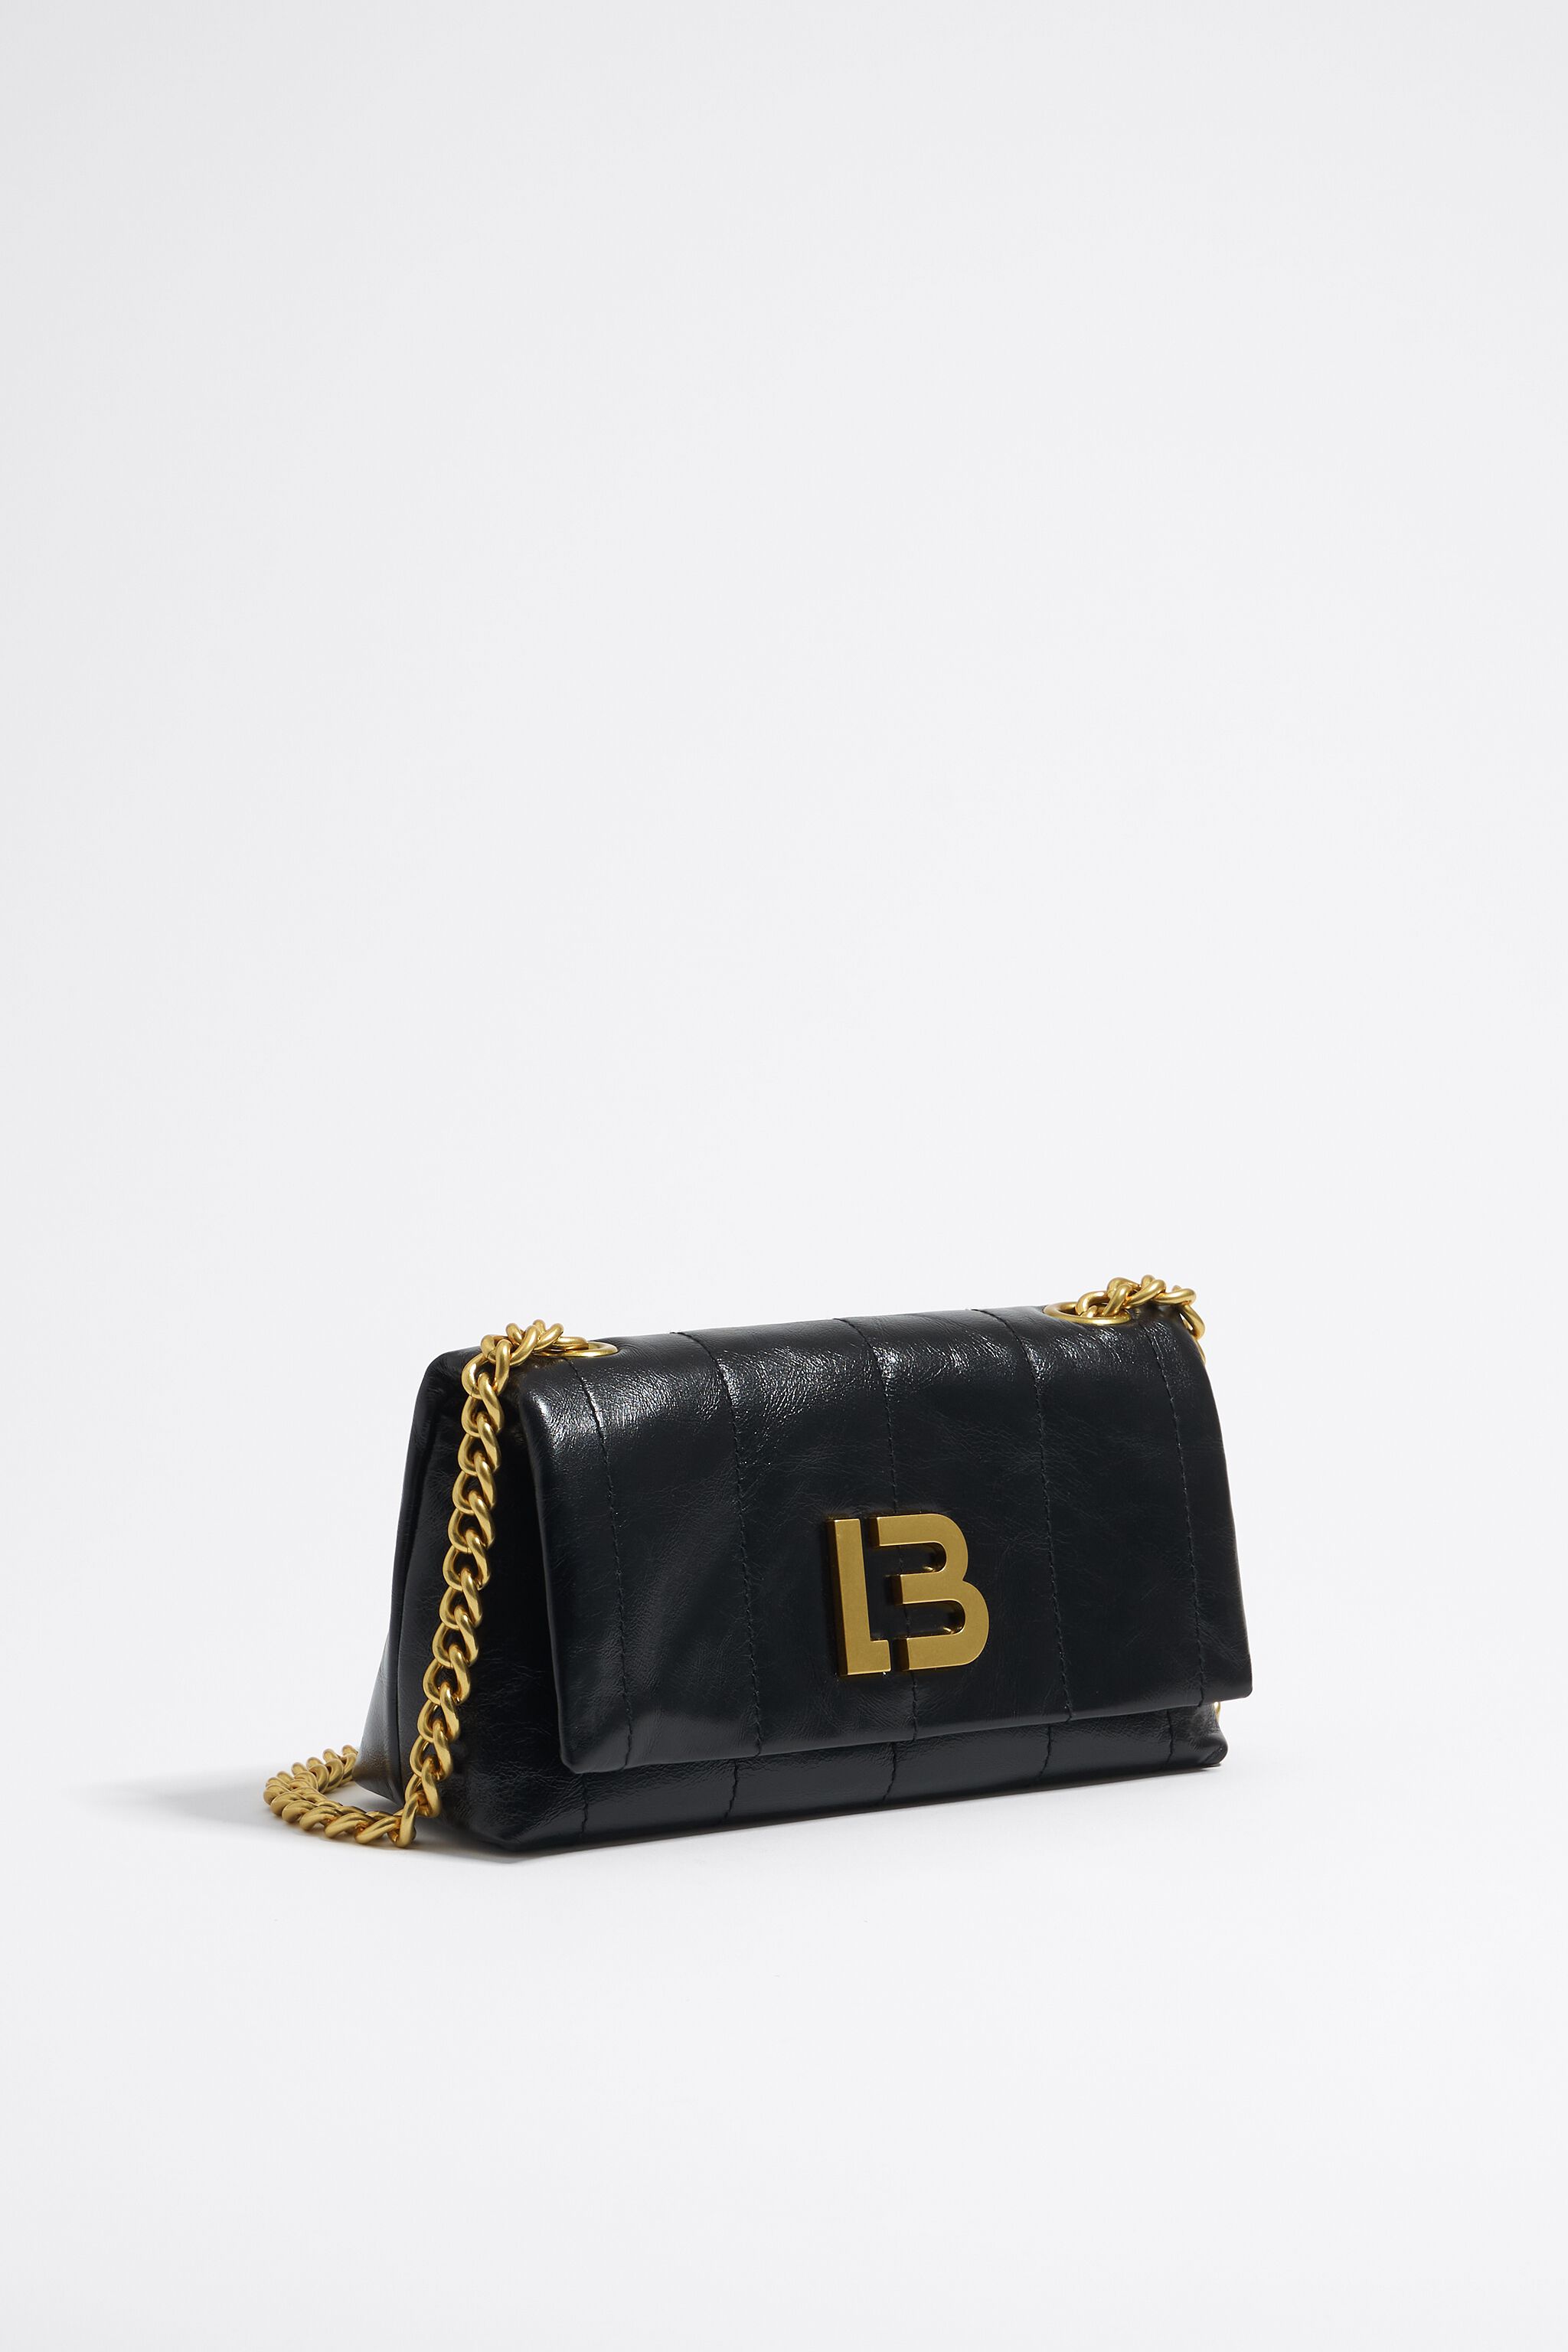 Small black leather bag flap